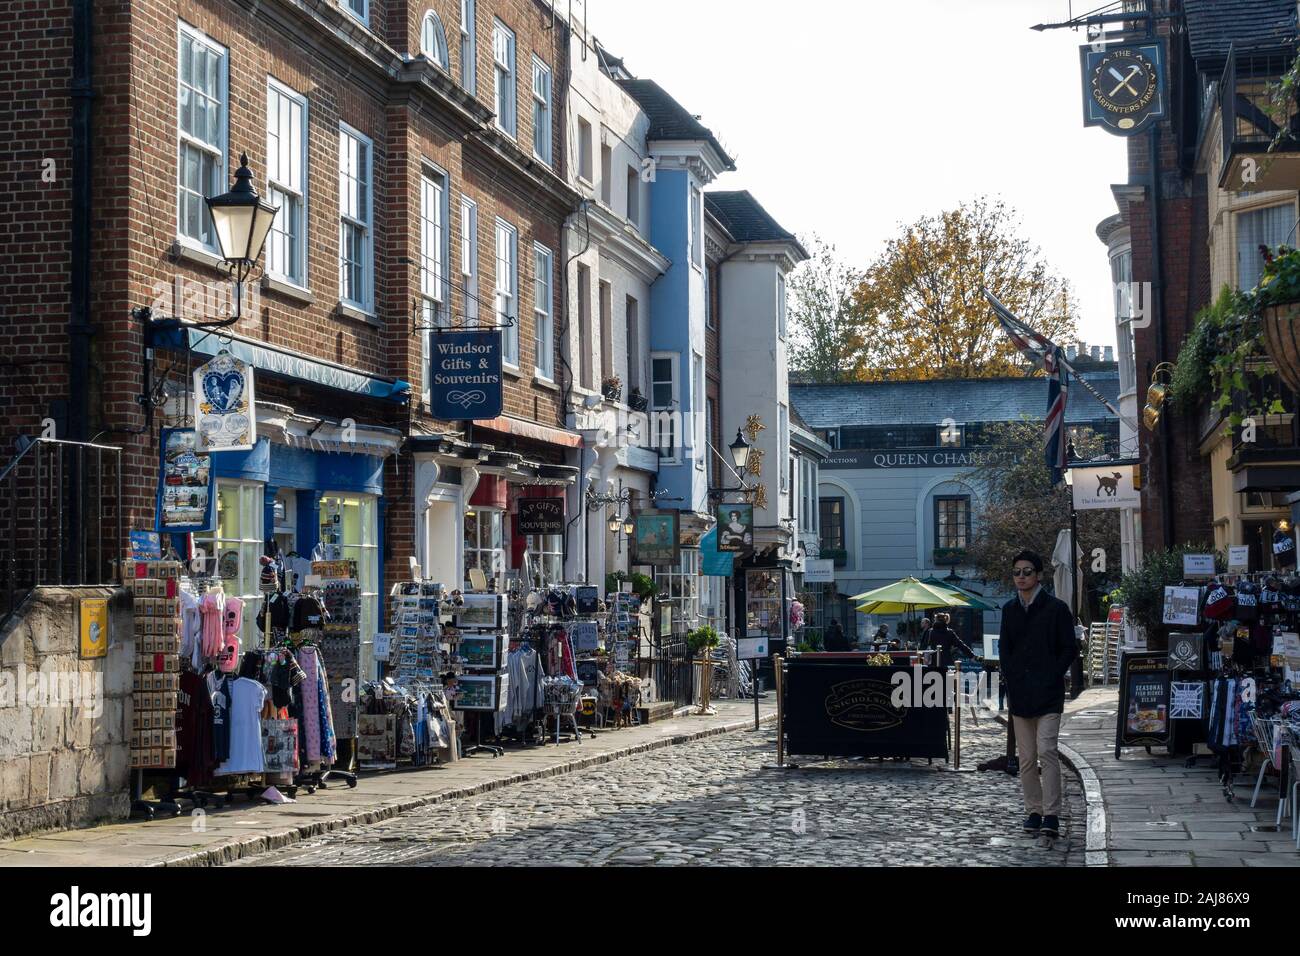 View looking along Church Street to The Queen Charlotte Pub in Windsor, Berkshire, England, United Kingdom Stock Photo